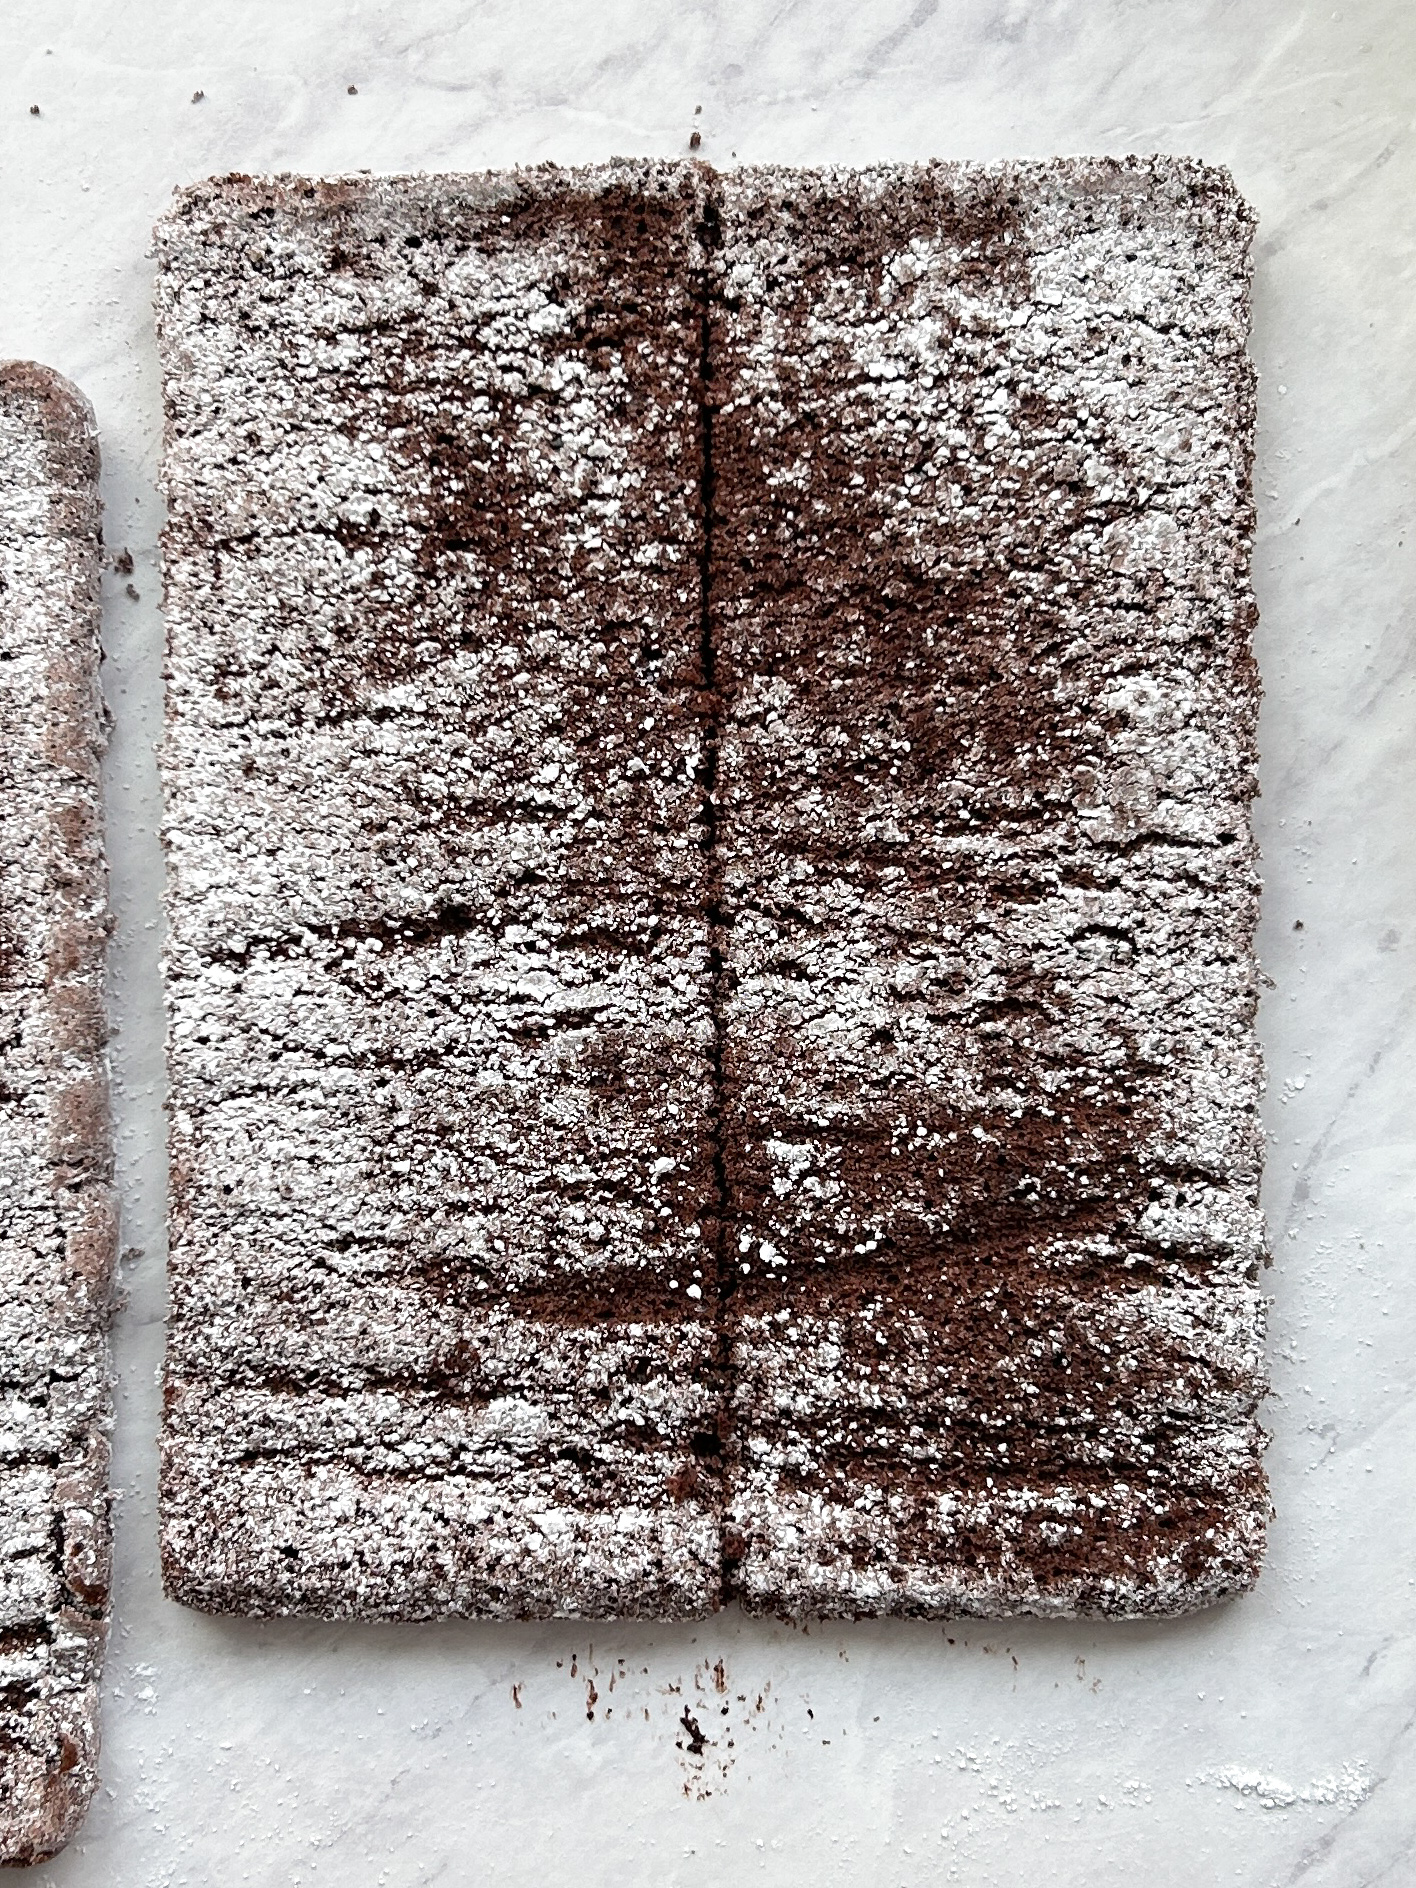 chocolate genoise sponge cake divided into 2 strips